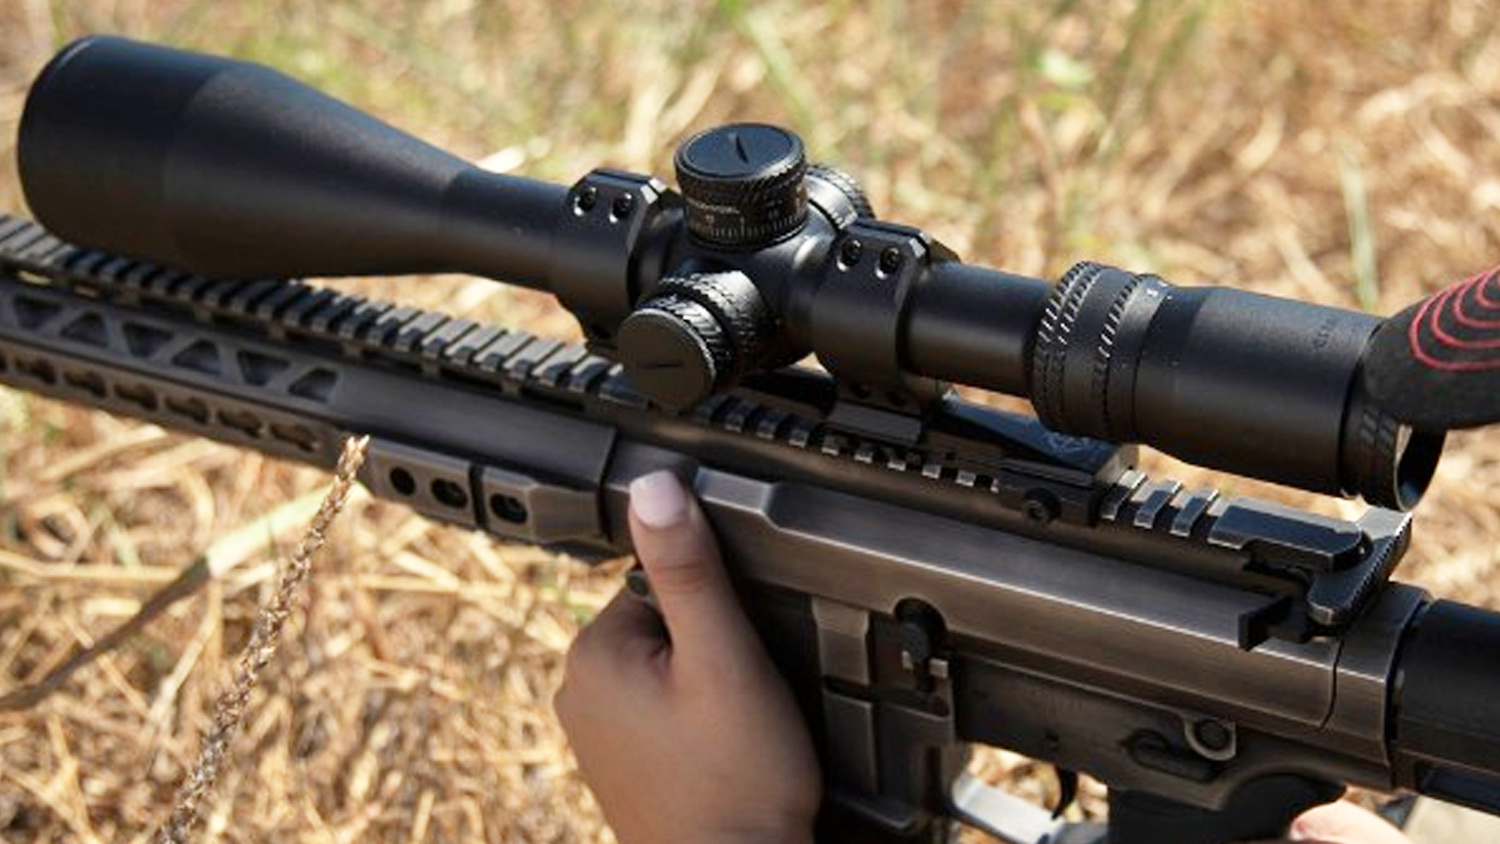 Sightmark's new Cantilever Scope Mounts for AR-style rifles